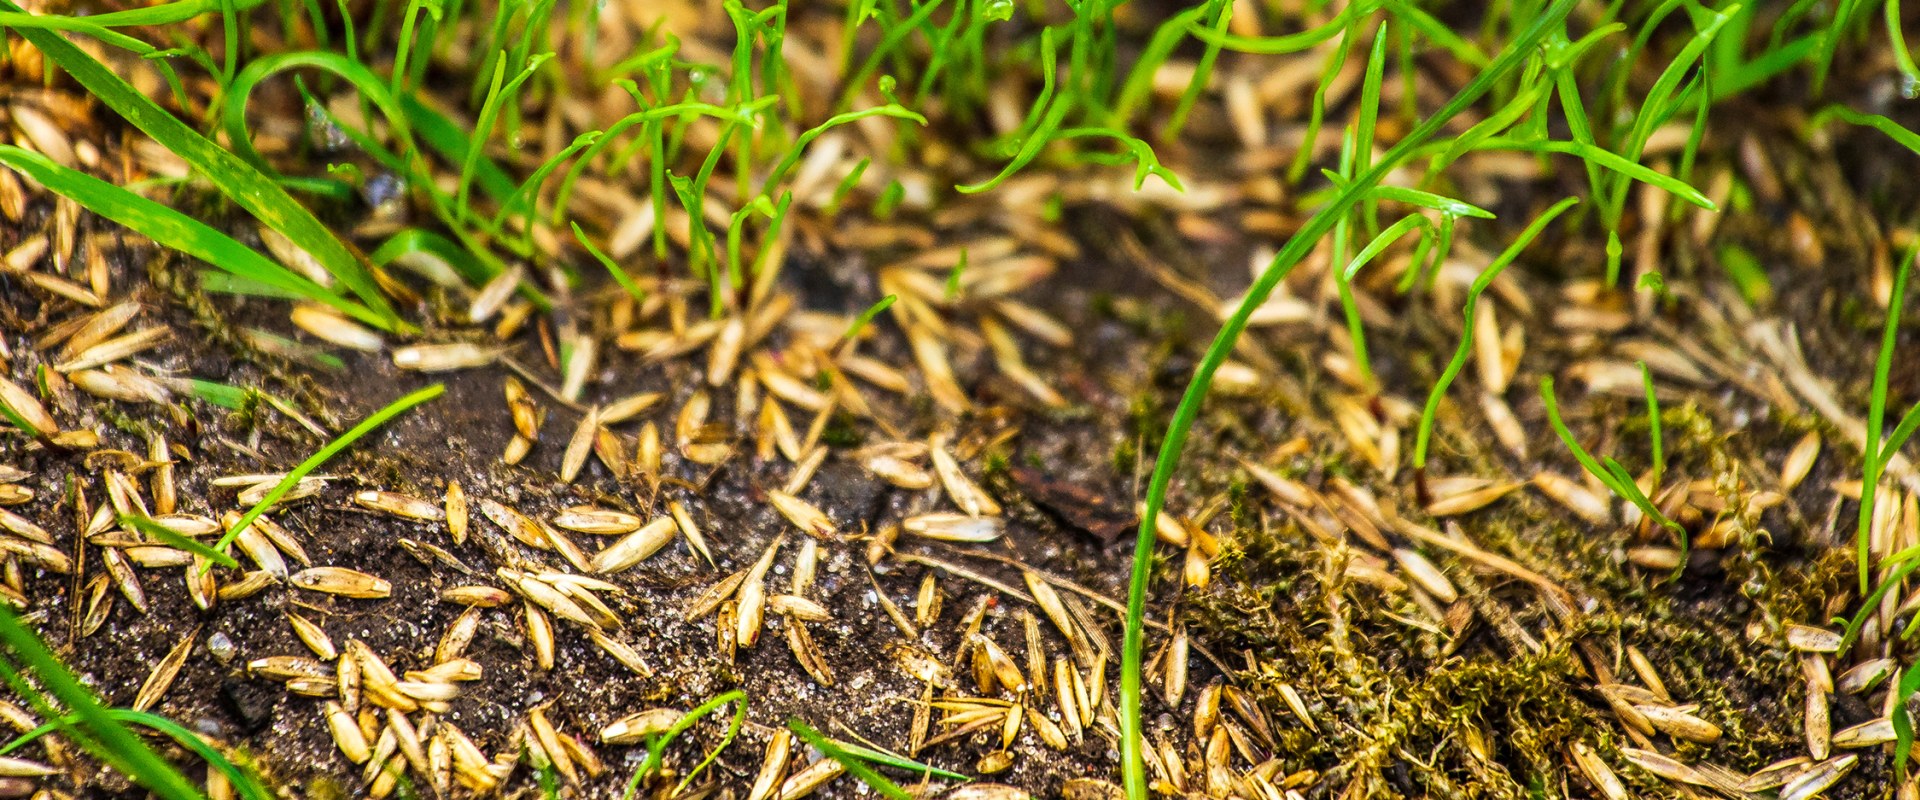 Where does grass seed come from?